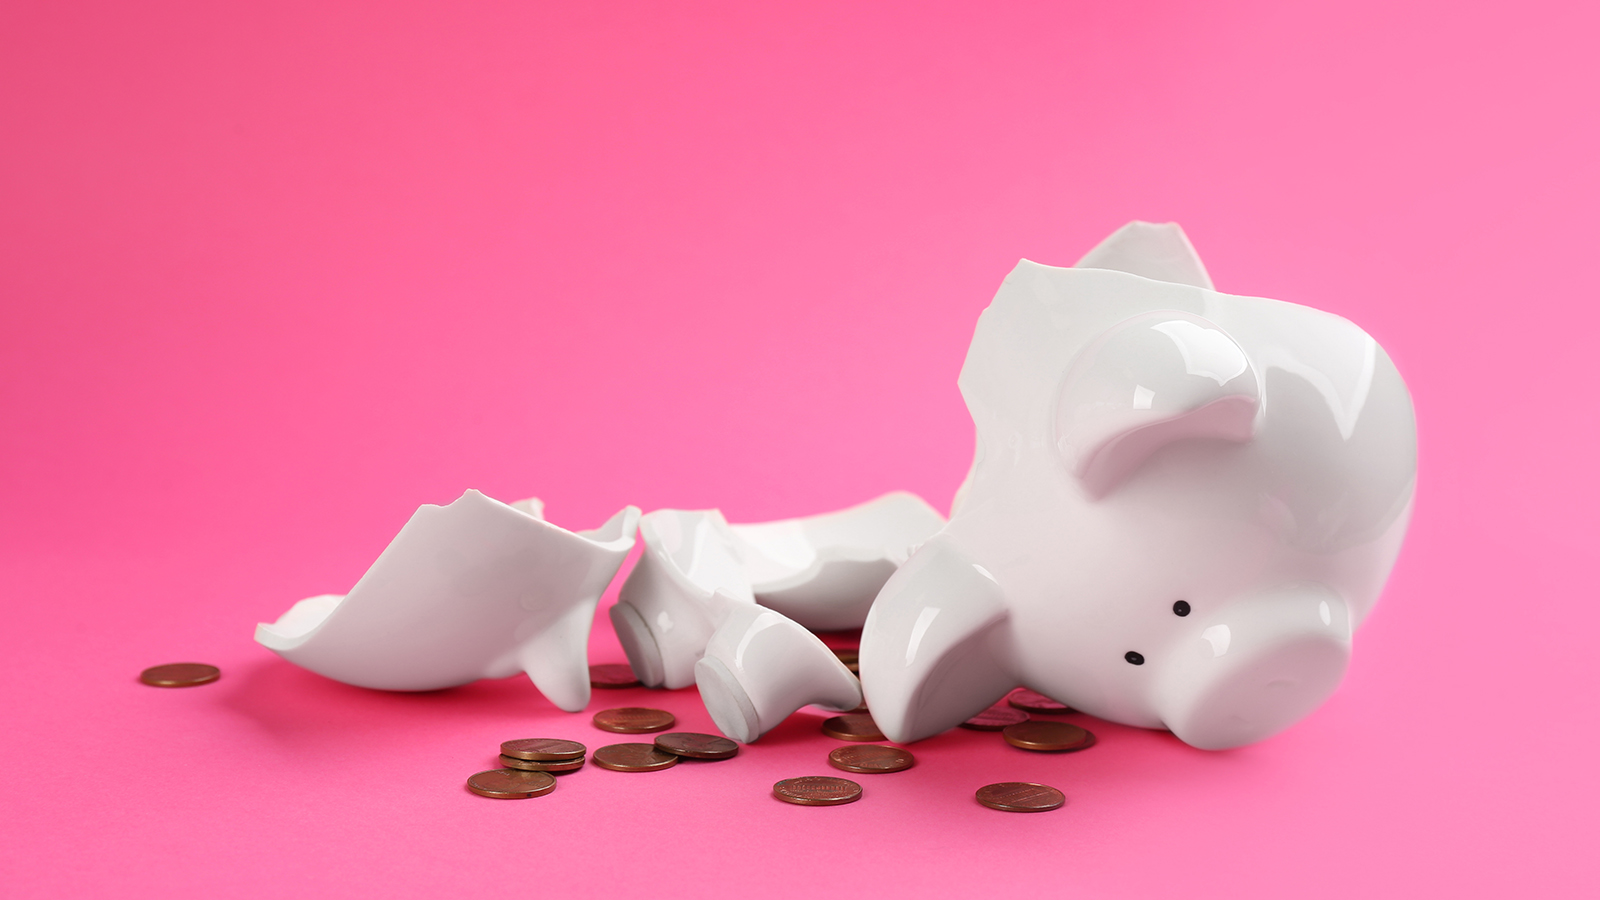 Broken piggy bank with coins on pink background